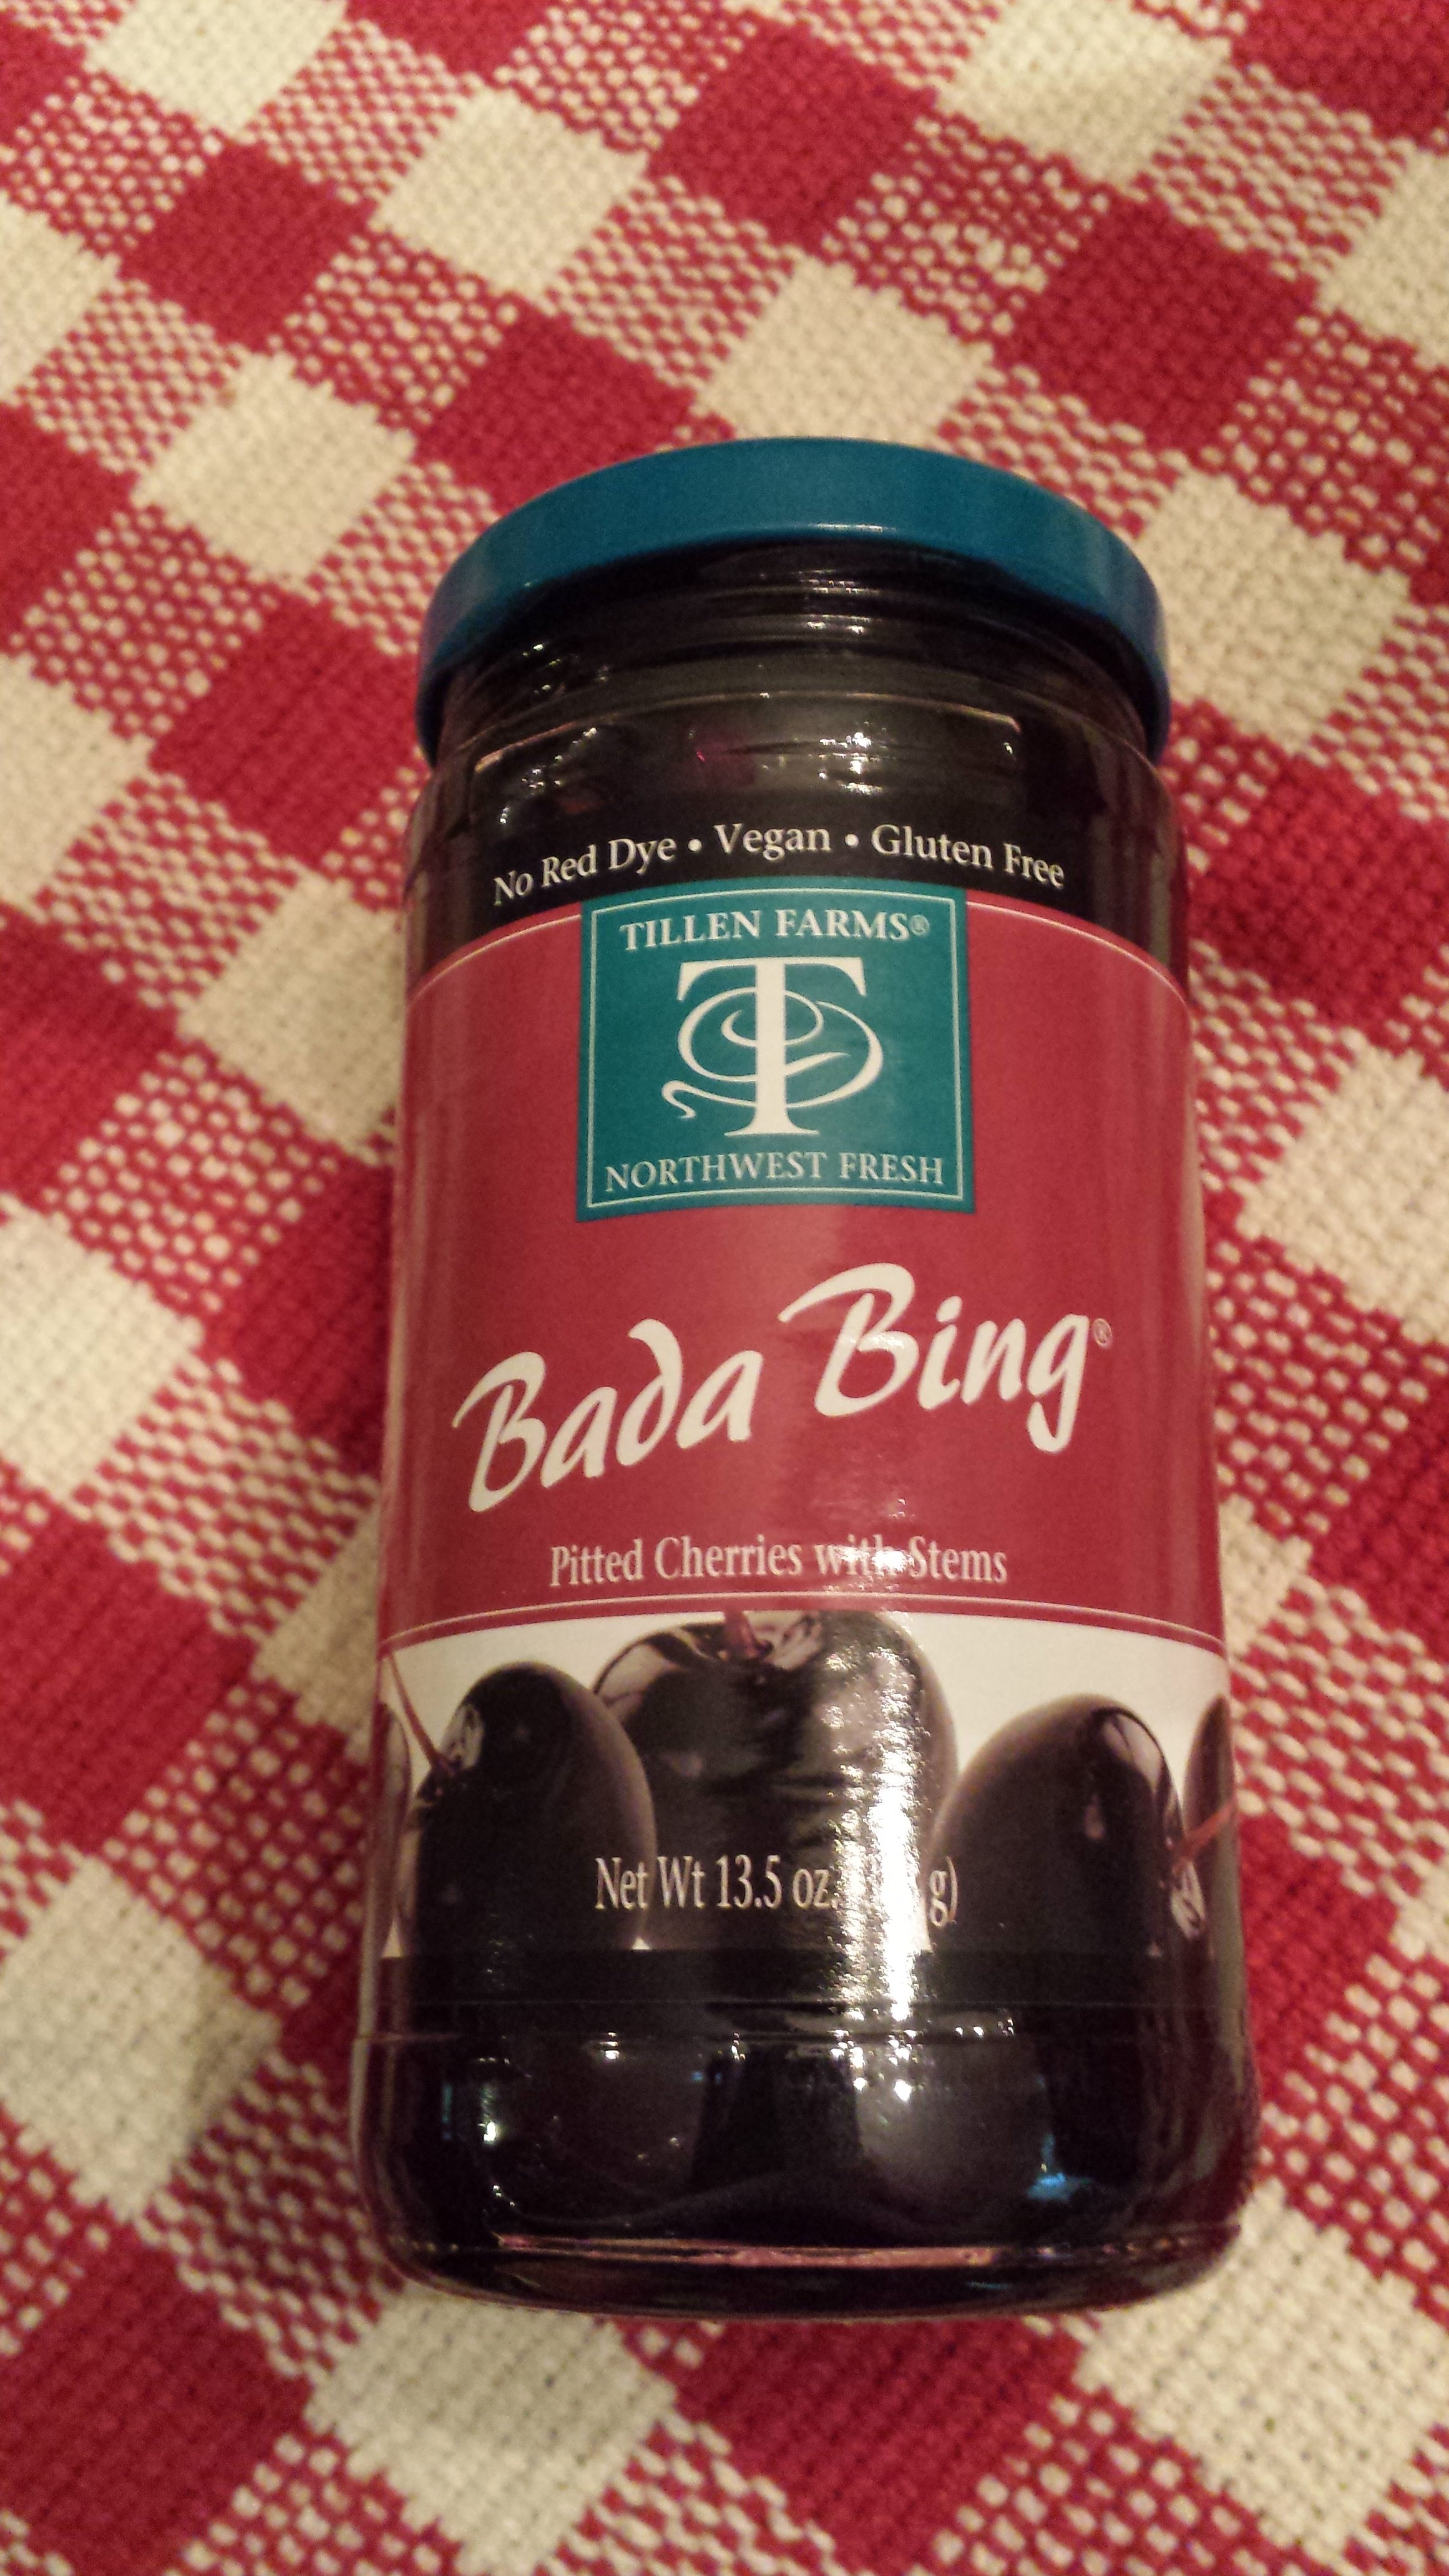 Tillen Farms Bada Bing Cherries made without red dyes (Photo Credit: Adroit Ideals)